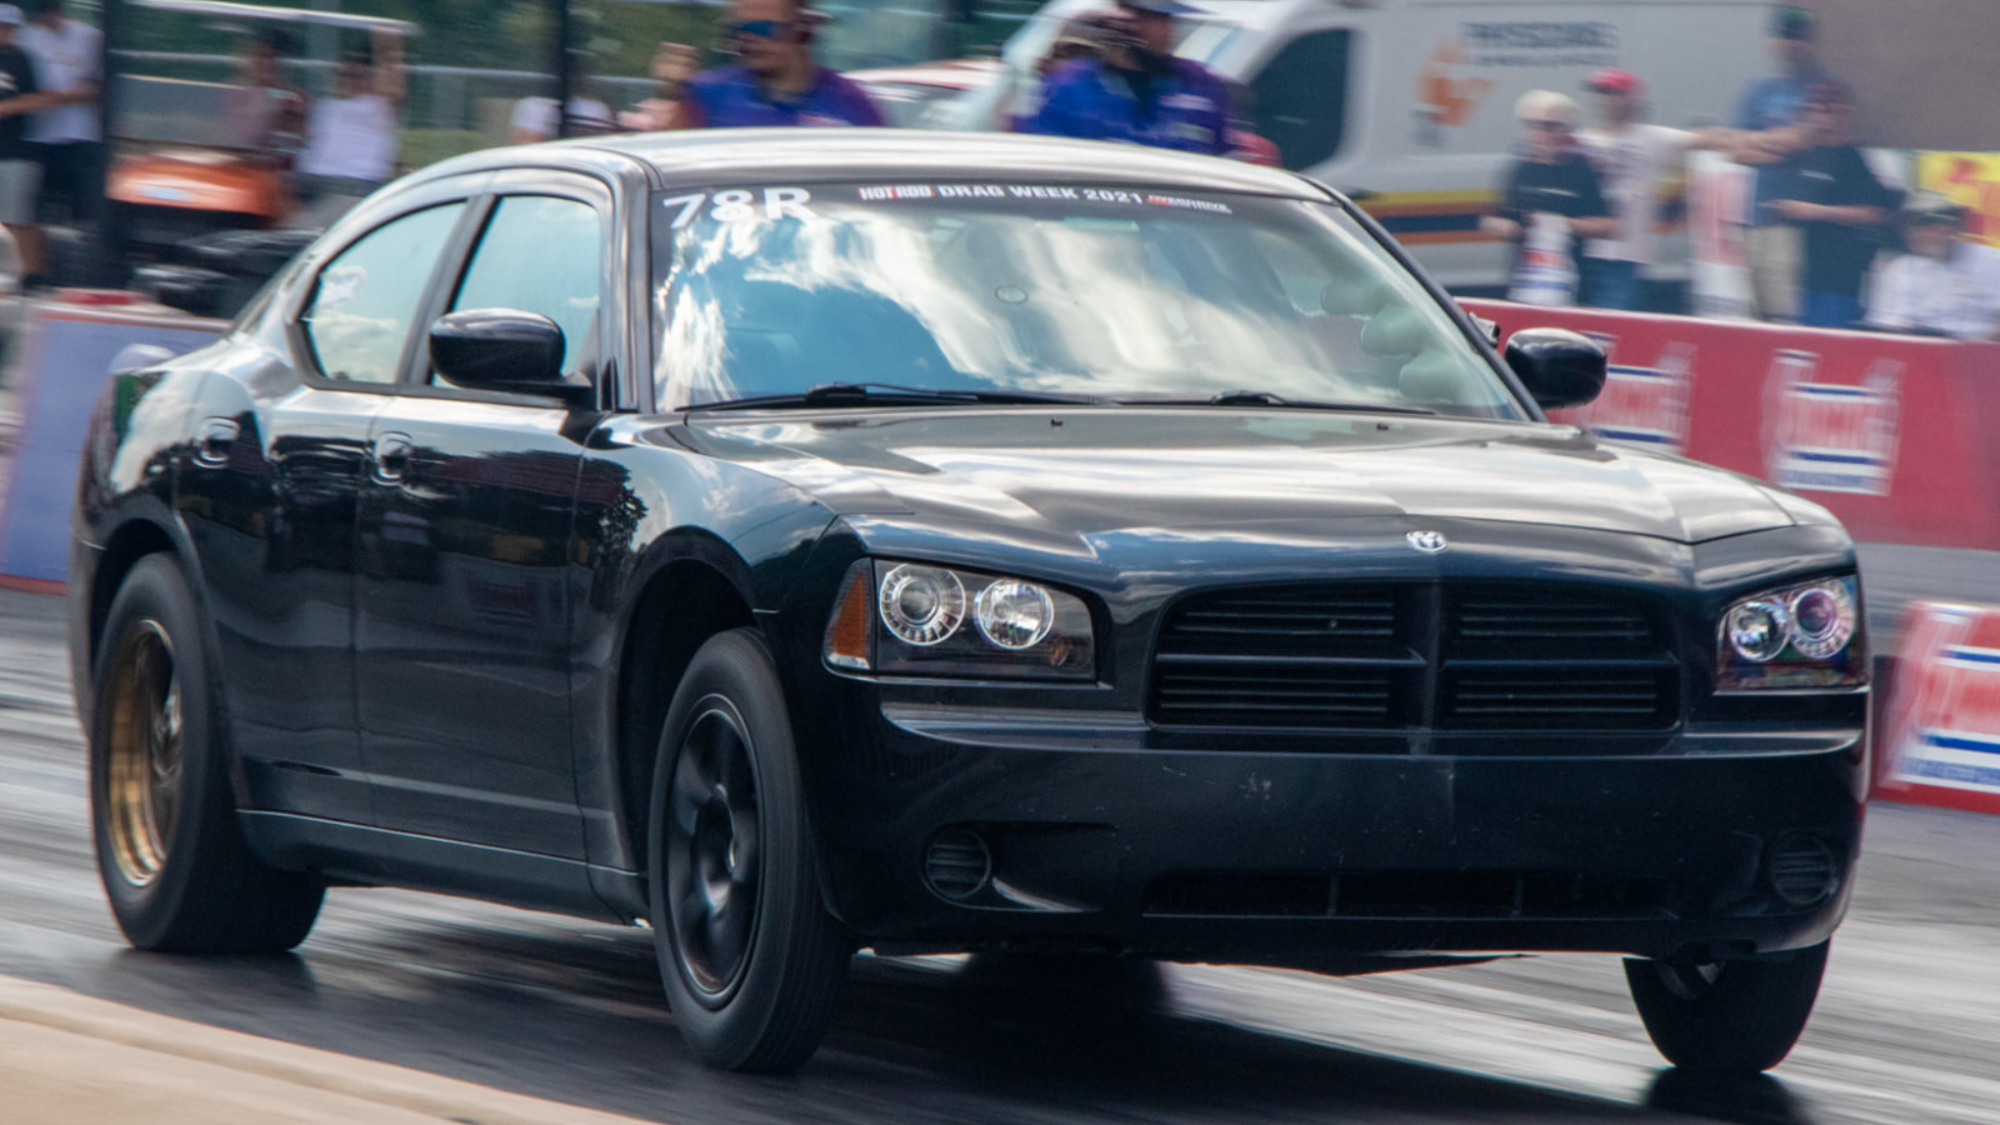 2009 Charger SE